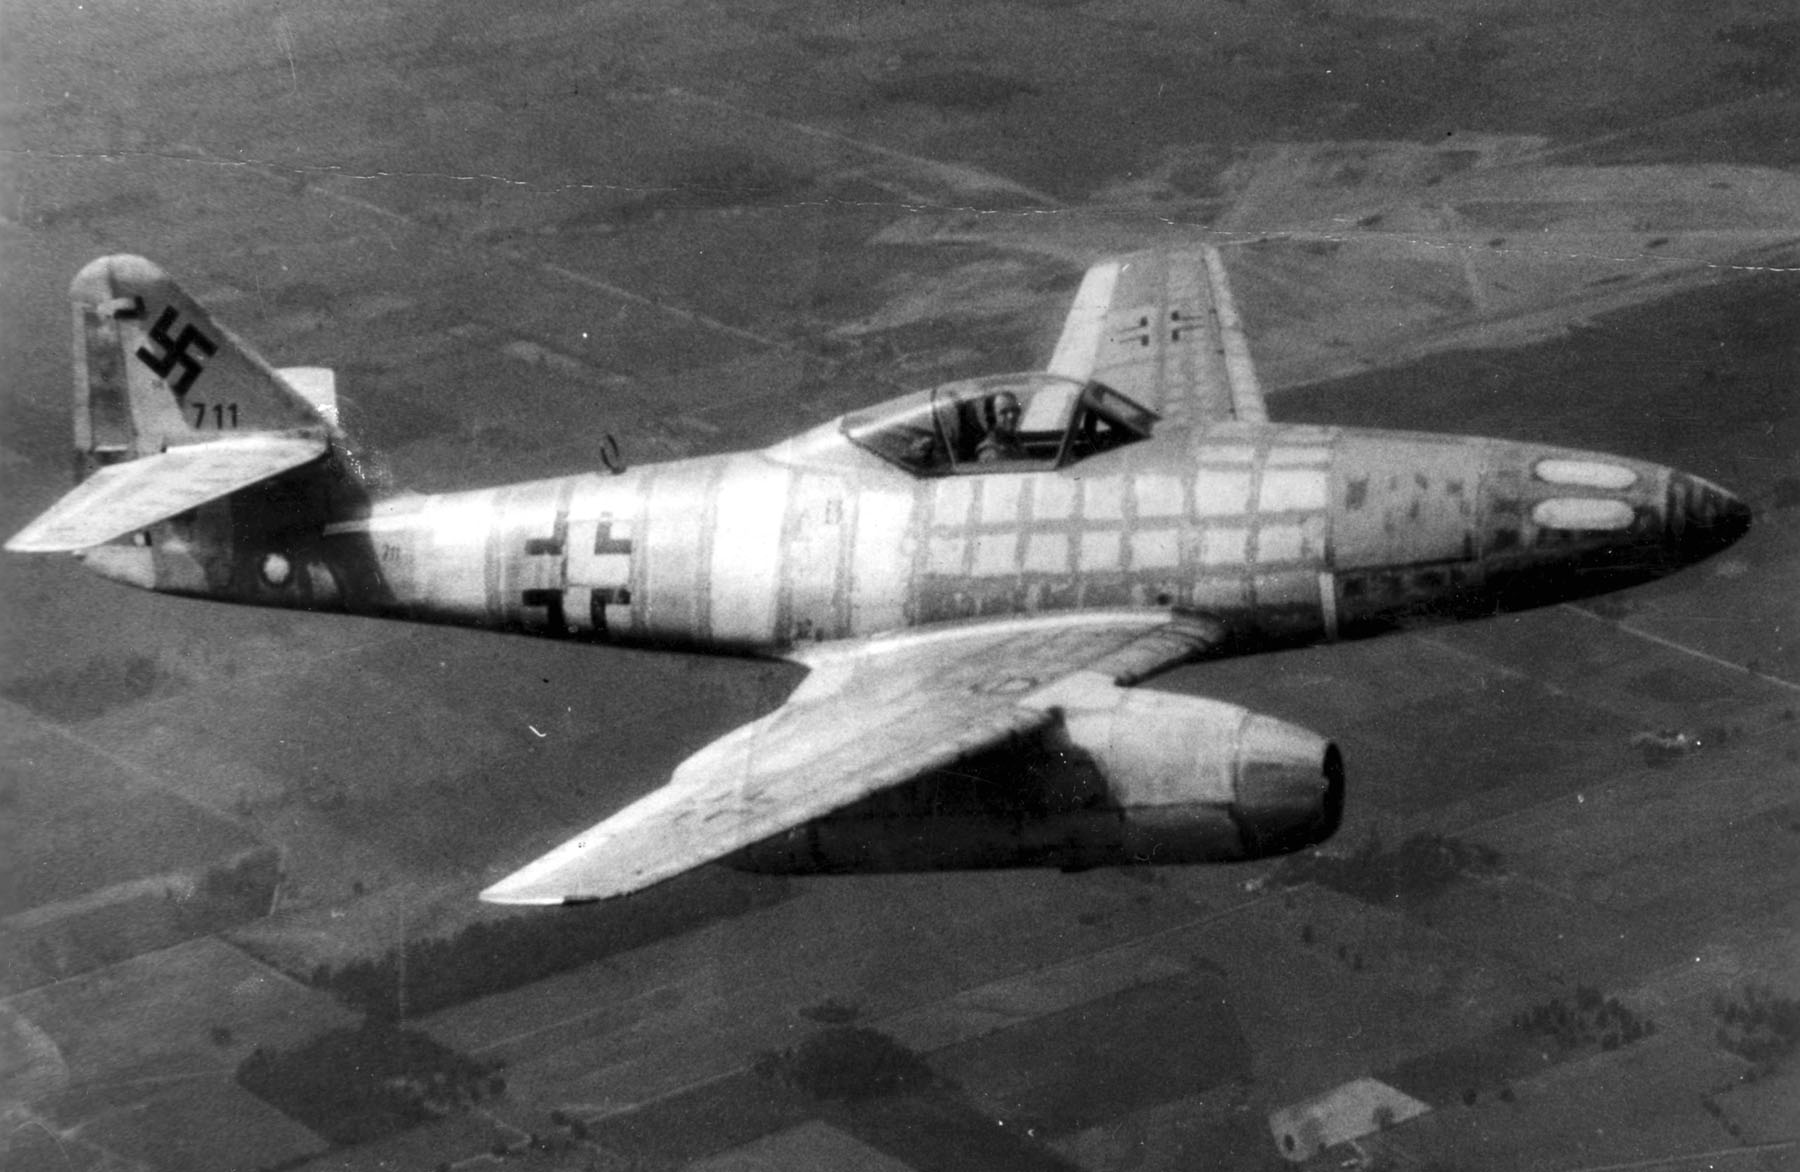 US test pilot assesses the German ME 262 jet fighter over Ohio, late 1945. This aircraft fell into Allied hands when the German pilot defected and landed the plane at a US held airfield in Germany.